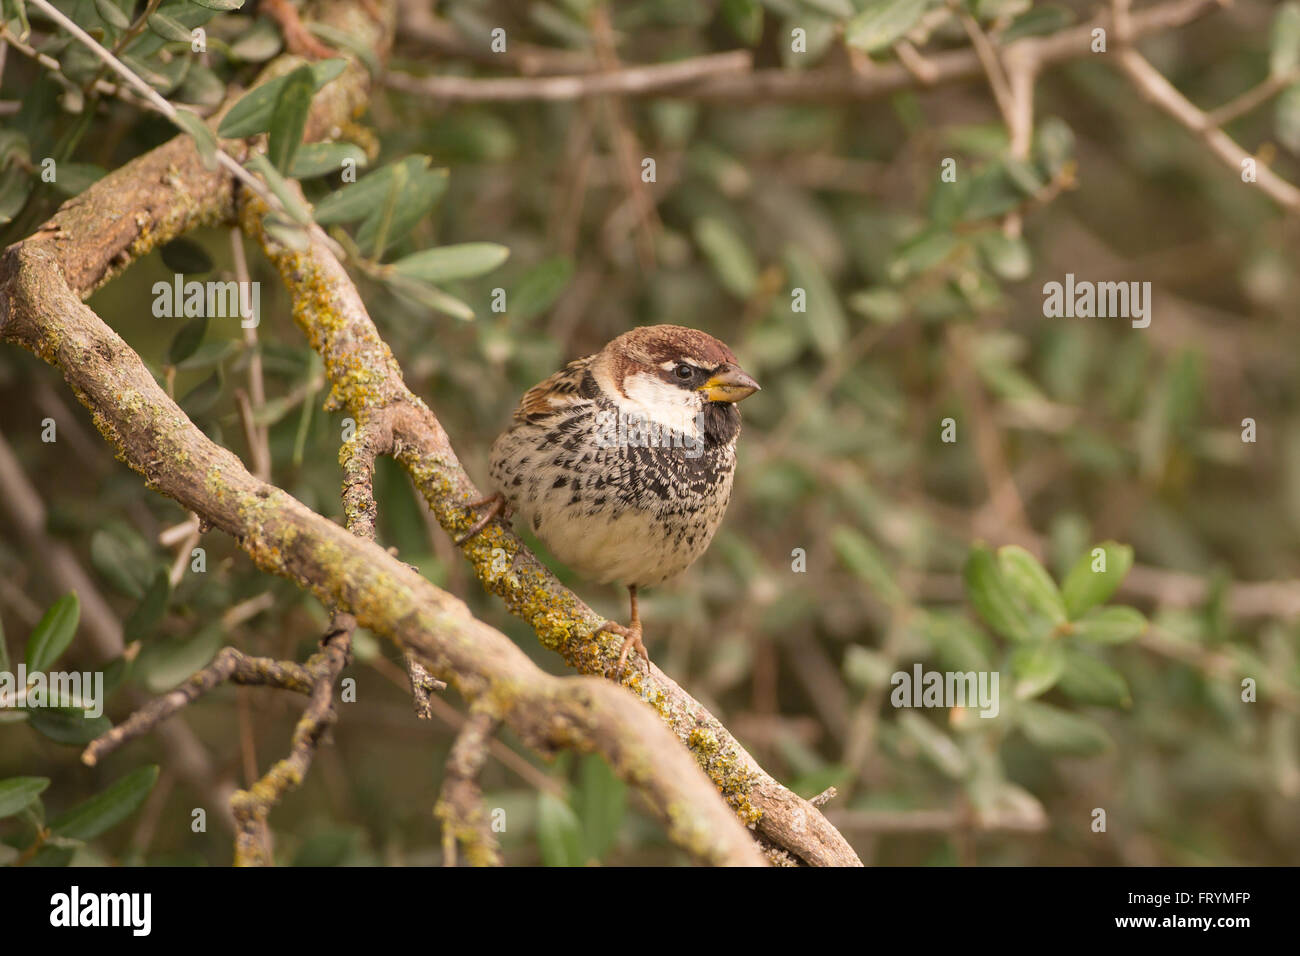 Spanish sparrow or willow sparrow (Passer hispaniolensis) is a passerine bird of the sparrow family Passeridae. It is found in t Stock Photo